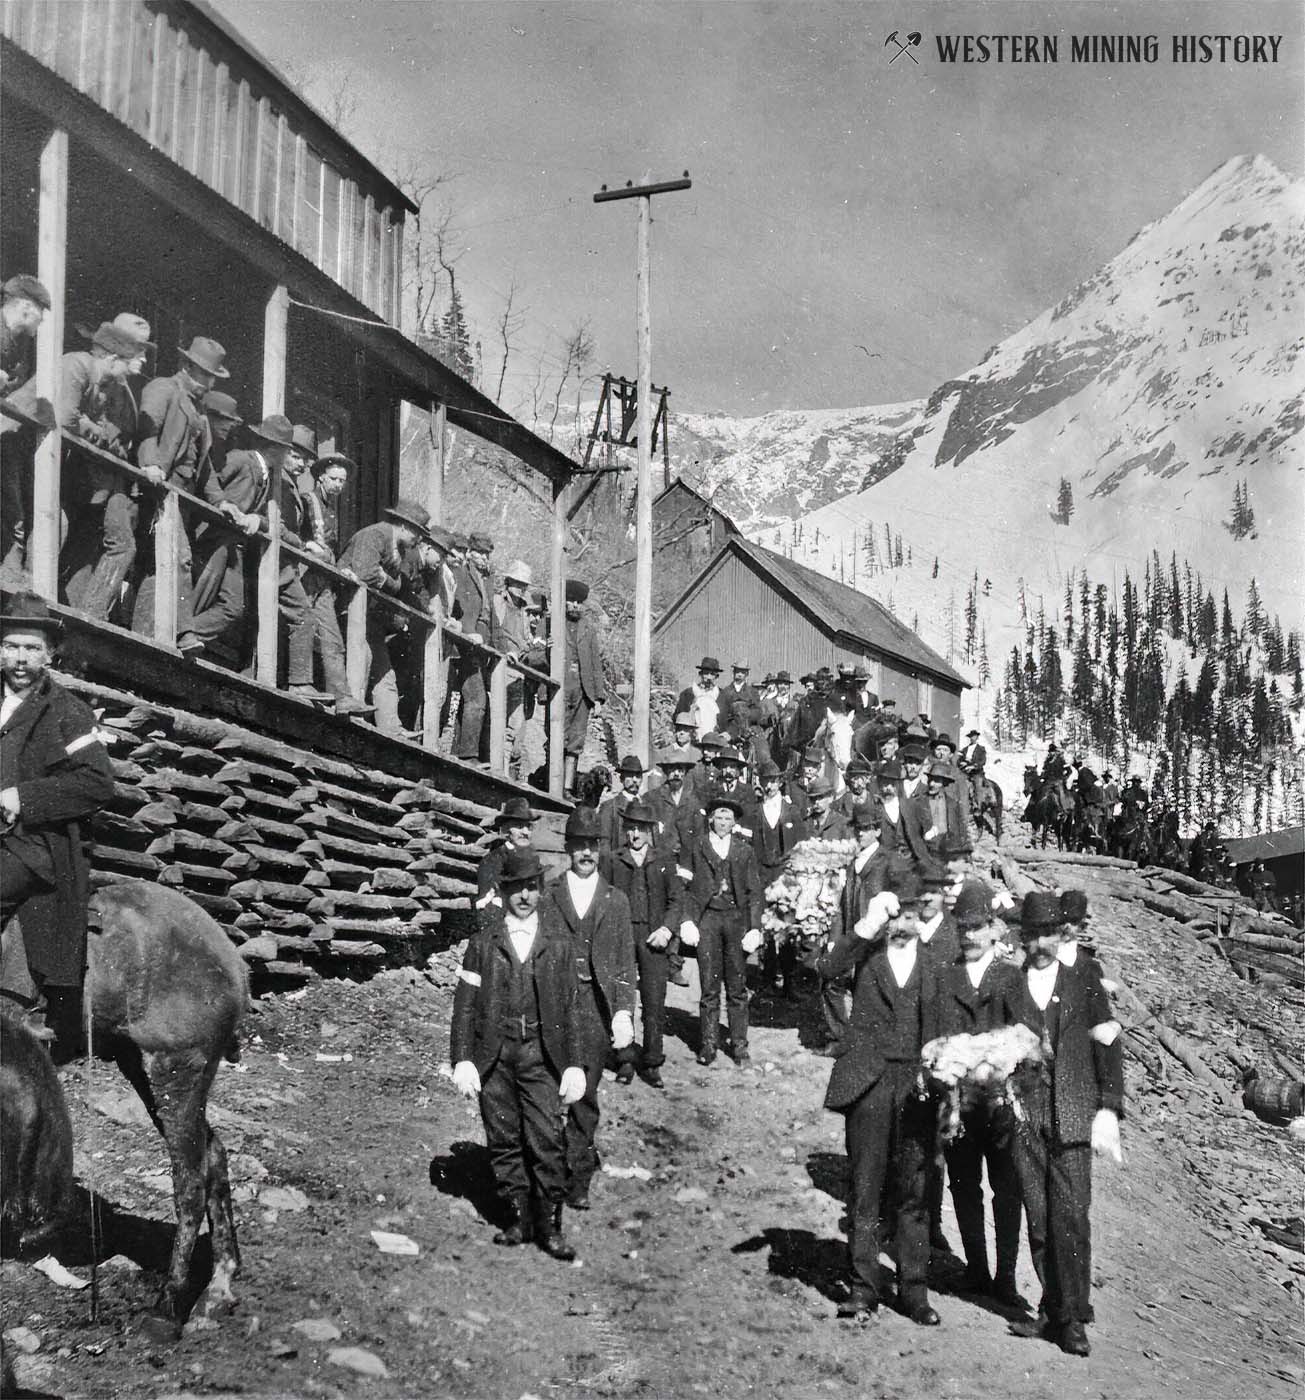 Funeral procession for Superintendent Charles M. Baker at the Smuggler Mine 1902